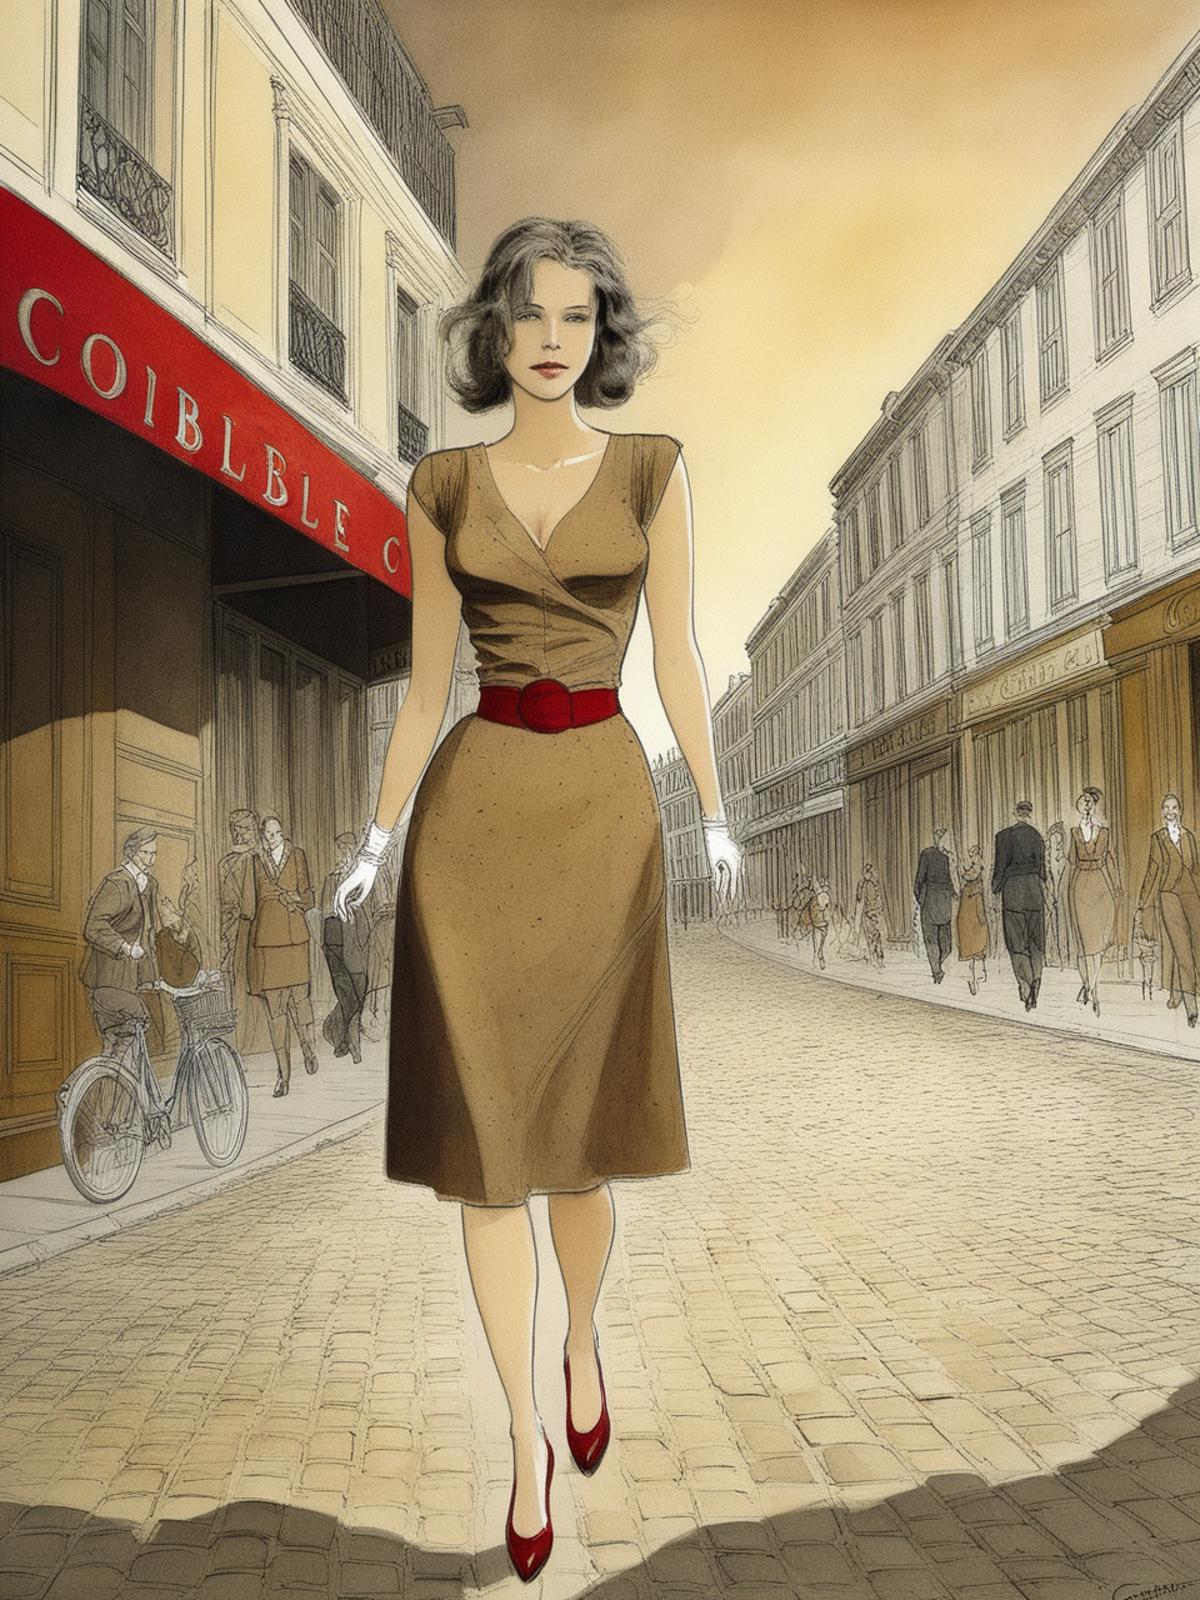 Style of Jean-Pierre Gibrat XL image by Invisidude